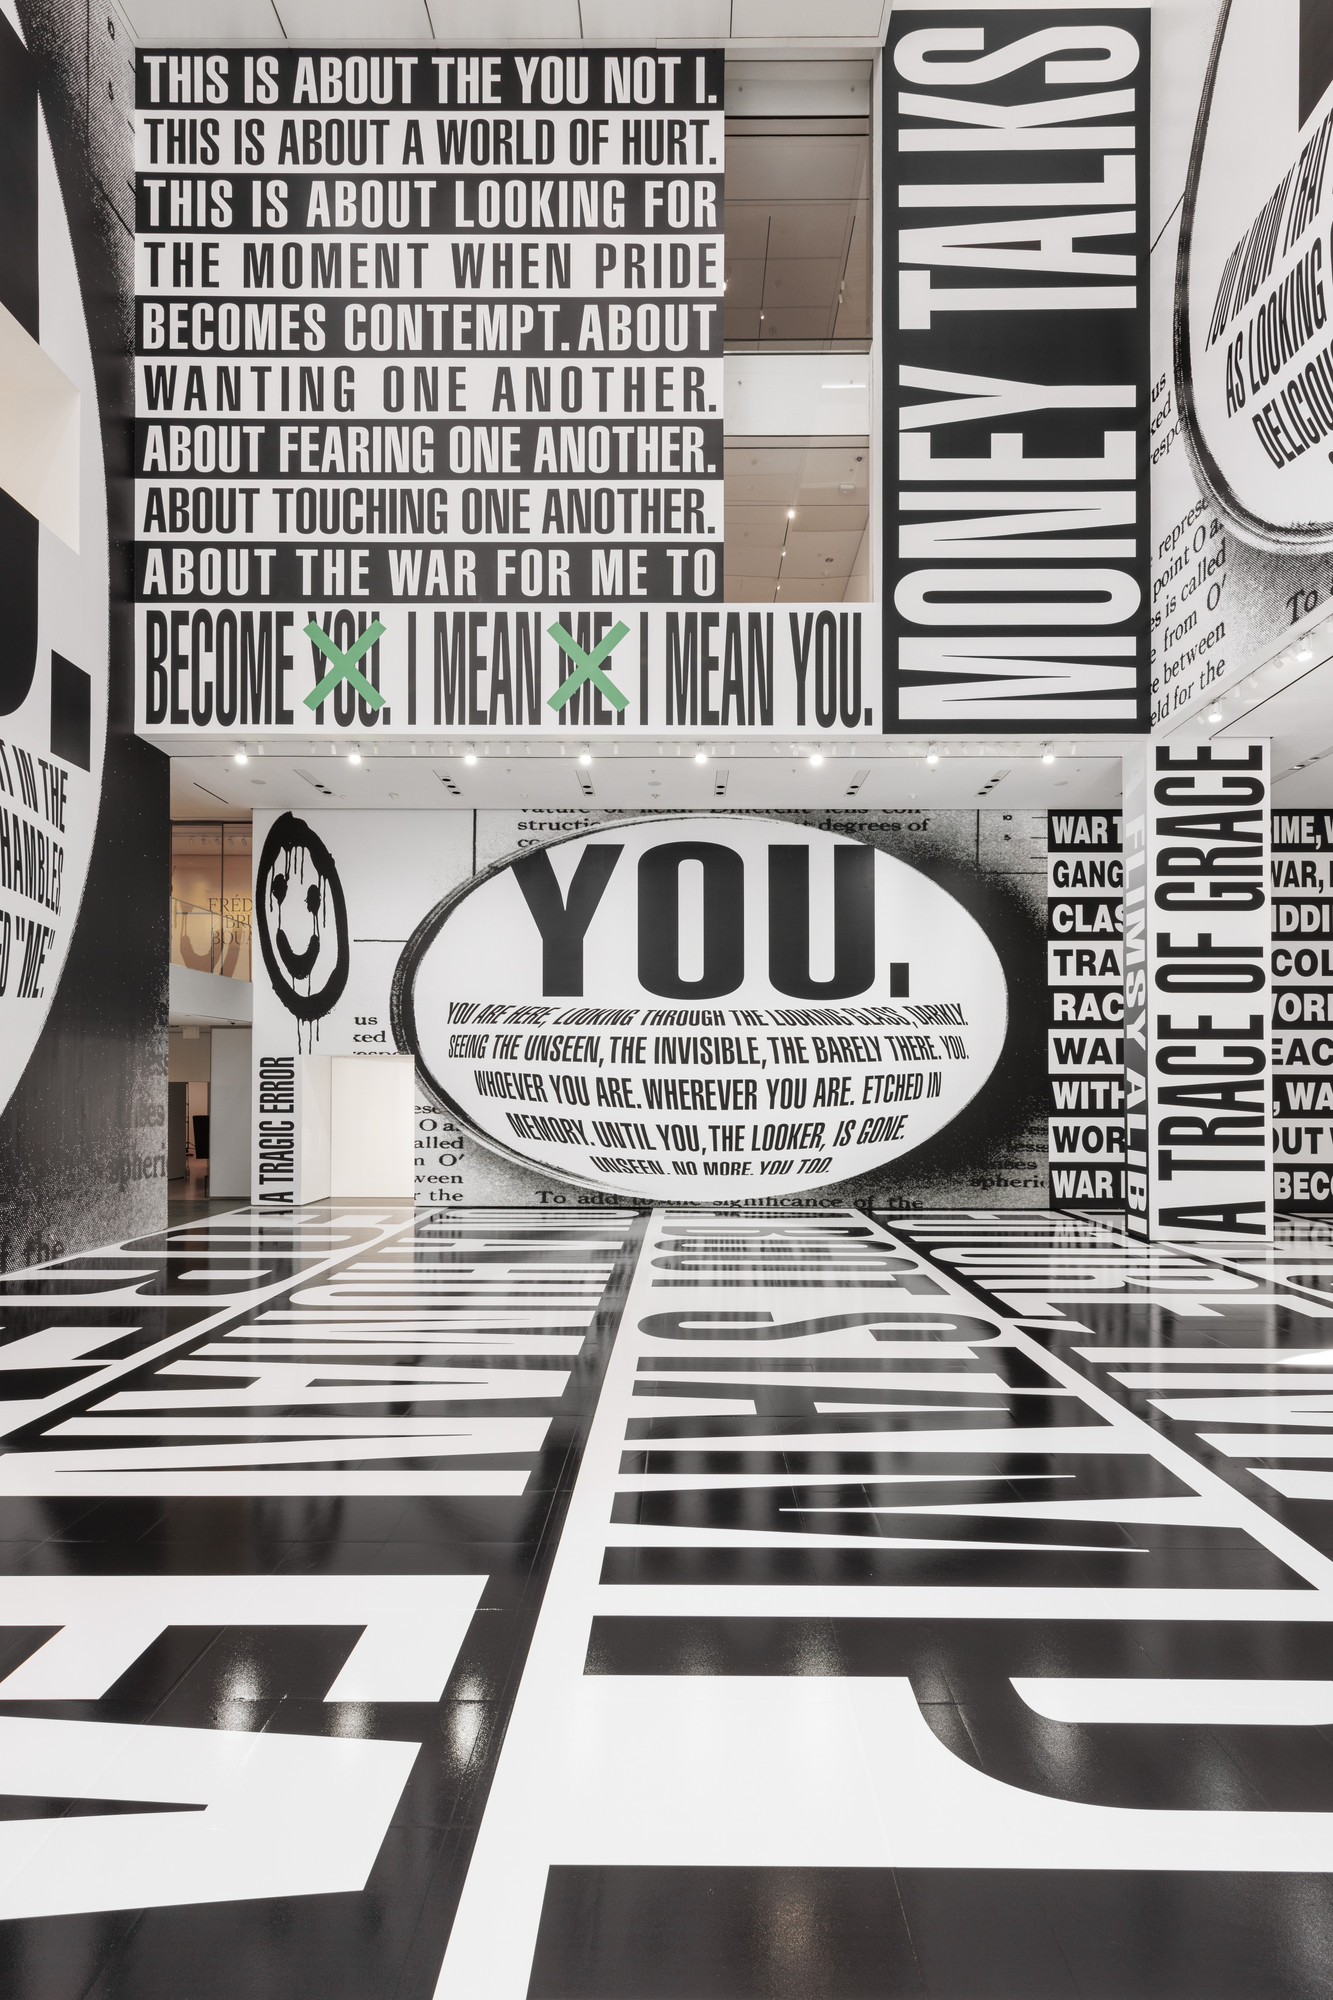 Installation view of the exhibition "Barbara Kruger Thinking of You. I